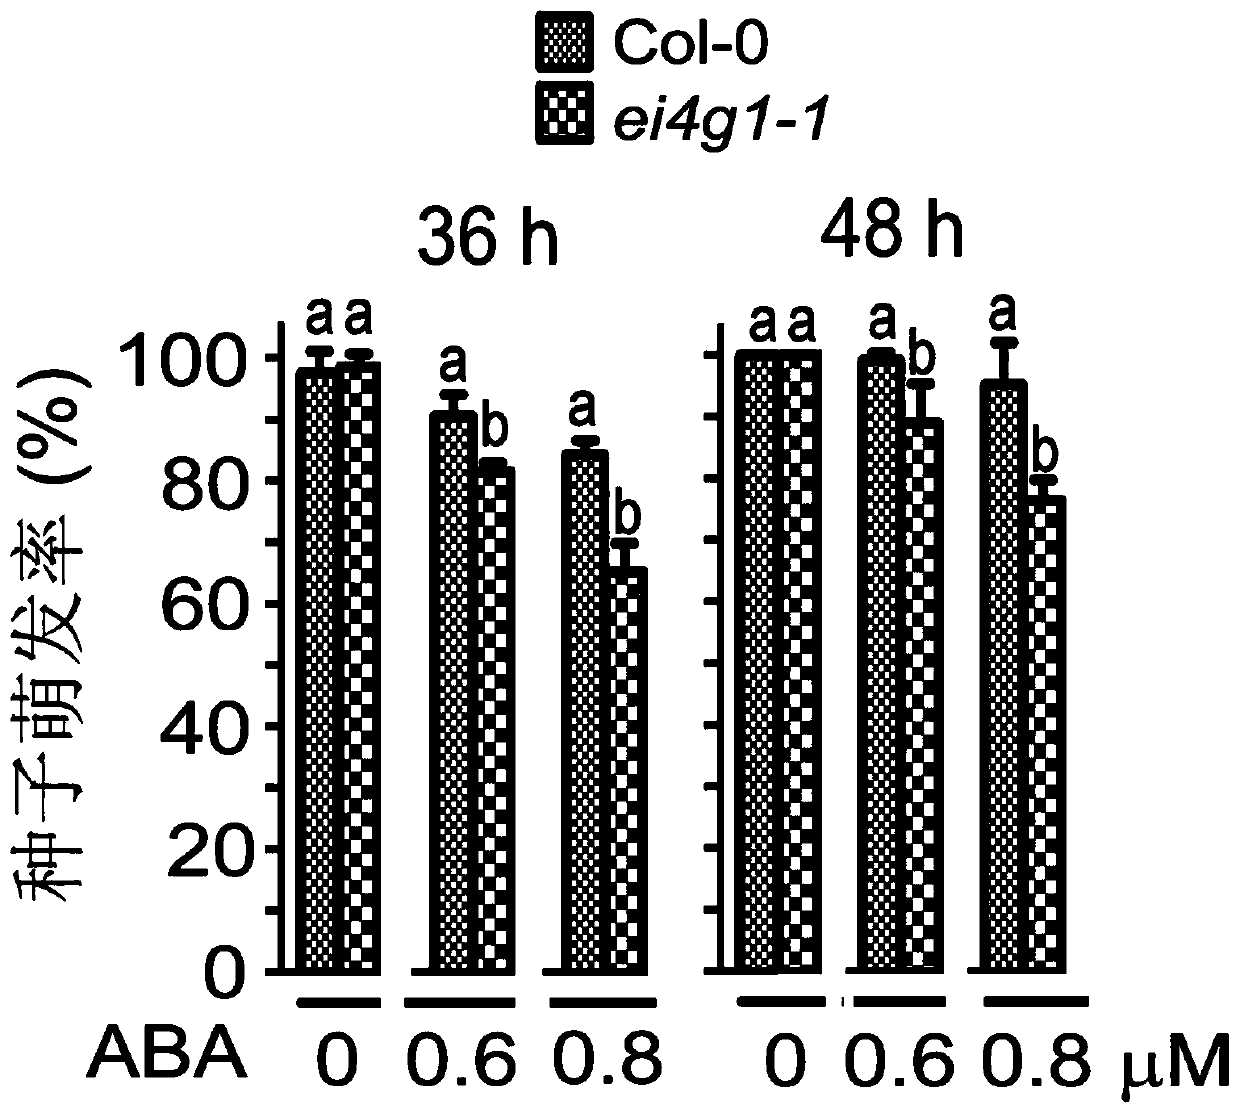 Application of eIFiso4G1 protein in regulating and controlling tolerance of plants to ABA